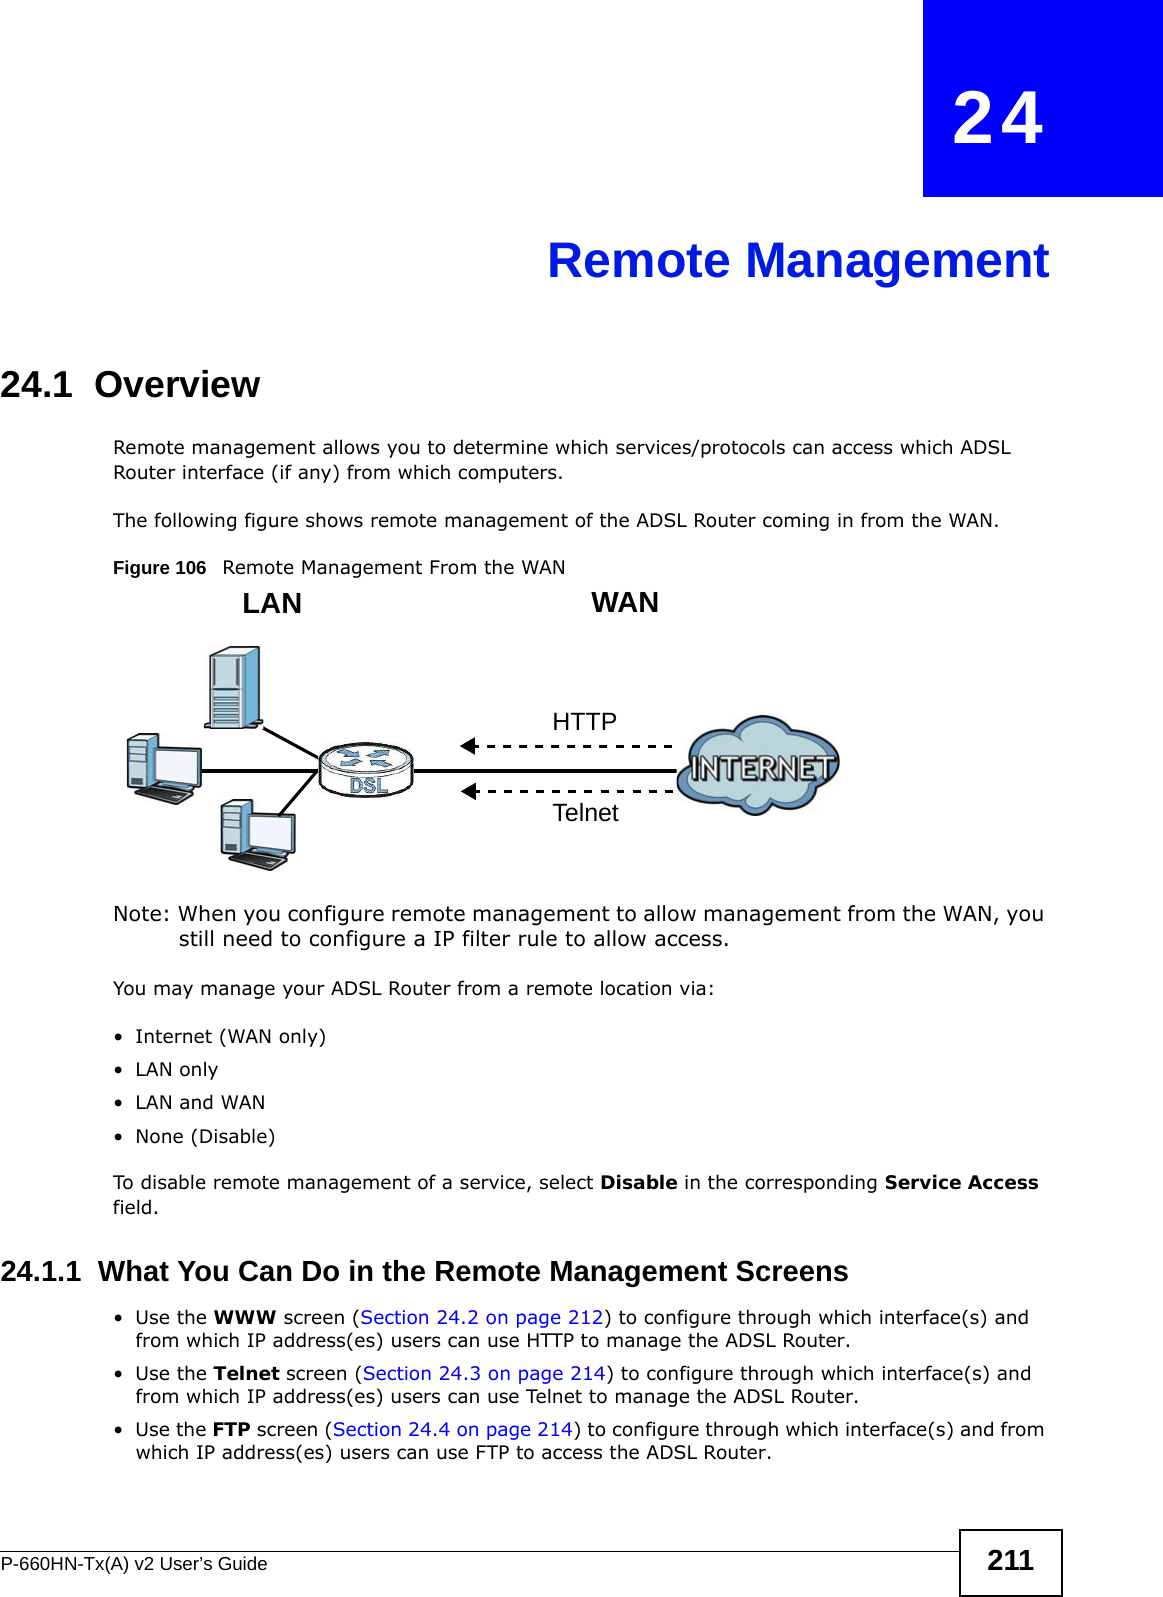 P-660HN-Tx(A) v2 User’s Guide 211CHAPTER   24Remote Management24.1  OverviewRemote management allows you to determine which services/protocols can access which ADSL Router interface (if any) from which computers.The following figure shows remote management of the ADSL Router coming in from the WAN.Figure 106   Remote Management From the WANNote: When you configure remote management to allow management from the WAN, you still need to configure a IP filter rule to allow access.You may manage your ADSL Router from a remote location via:• Internet (WAN only)•LAN only•LAN and WAN• None (Disable)To disable remote management of a service, select Disable in the corresponding Service Access field.24.1.1  What You Can Do in the Remote Management Screens•Use the WWW screen (Section 24.2 on page 212) to configure through which interface(s) and from which IP address(es) users can use HTTP to manage the ADSL Router.•Use the Telnet screen (Section 24.3 on page 214) to configure through which interface(s) and from which IP address(es) users can use Telnet to manage the ADSL Router.•Use the FTP screen (Section 24.4 on page 214) to configure through which interface(s) and from which IP address(es) users can use FTP to access the ADSL Router.LAN WANHTTPTelnet